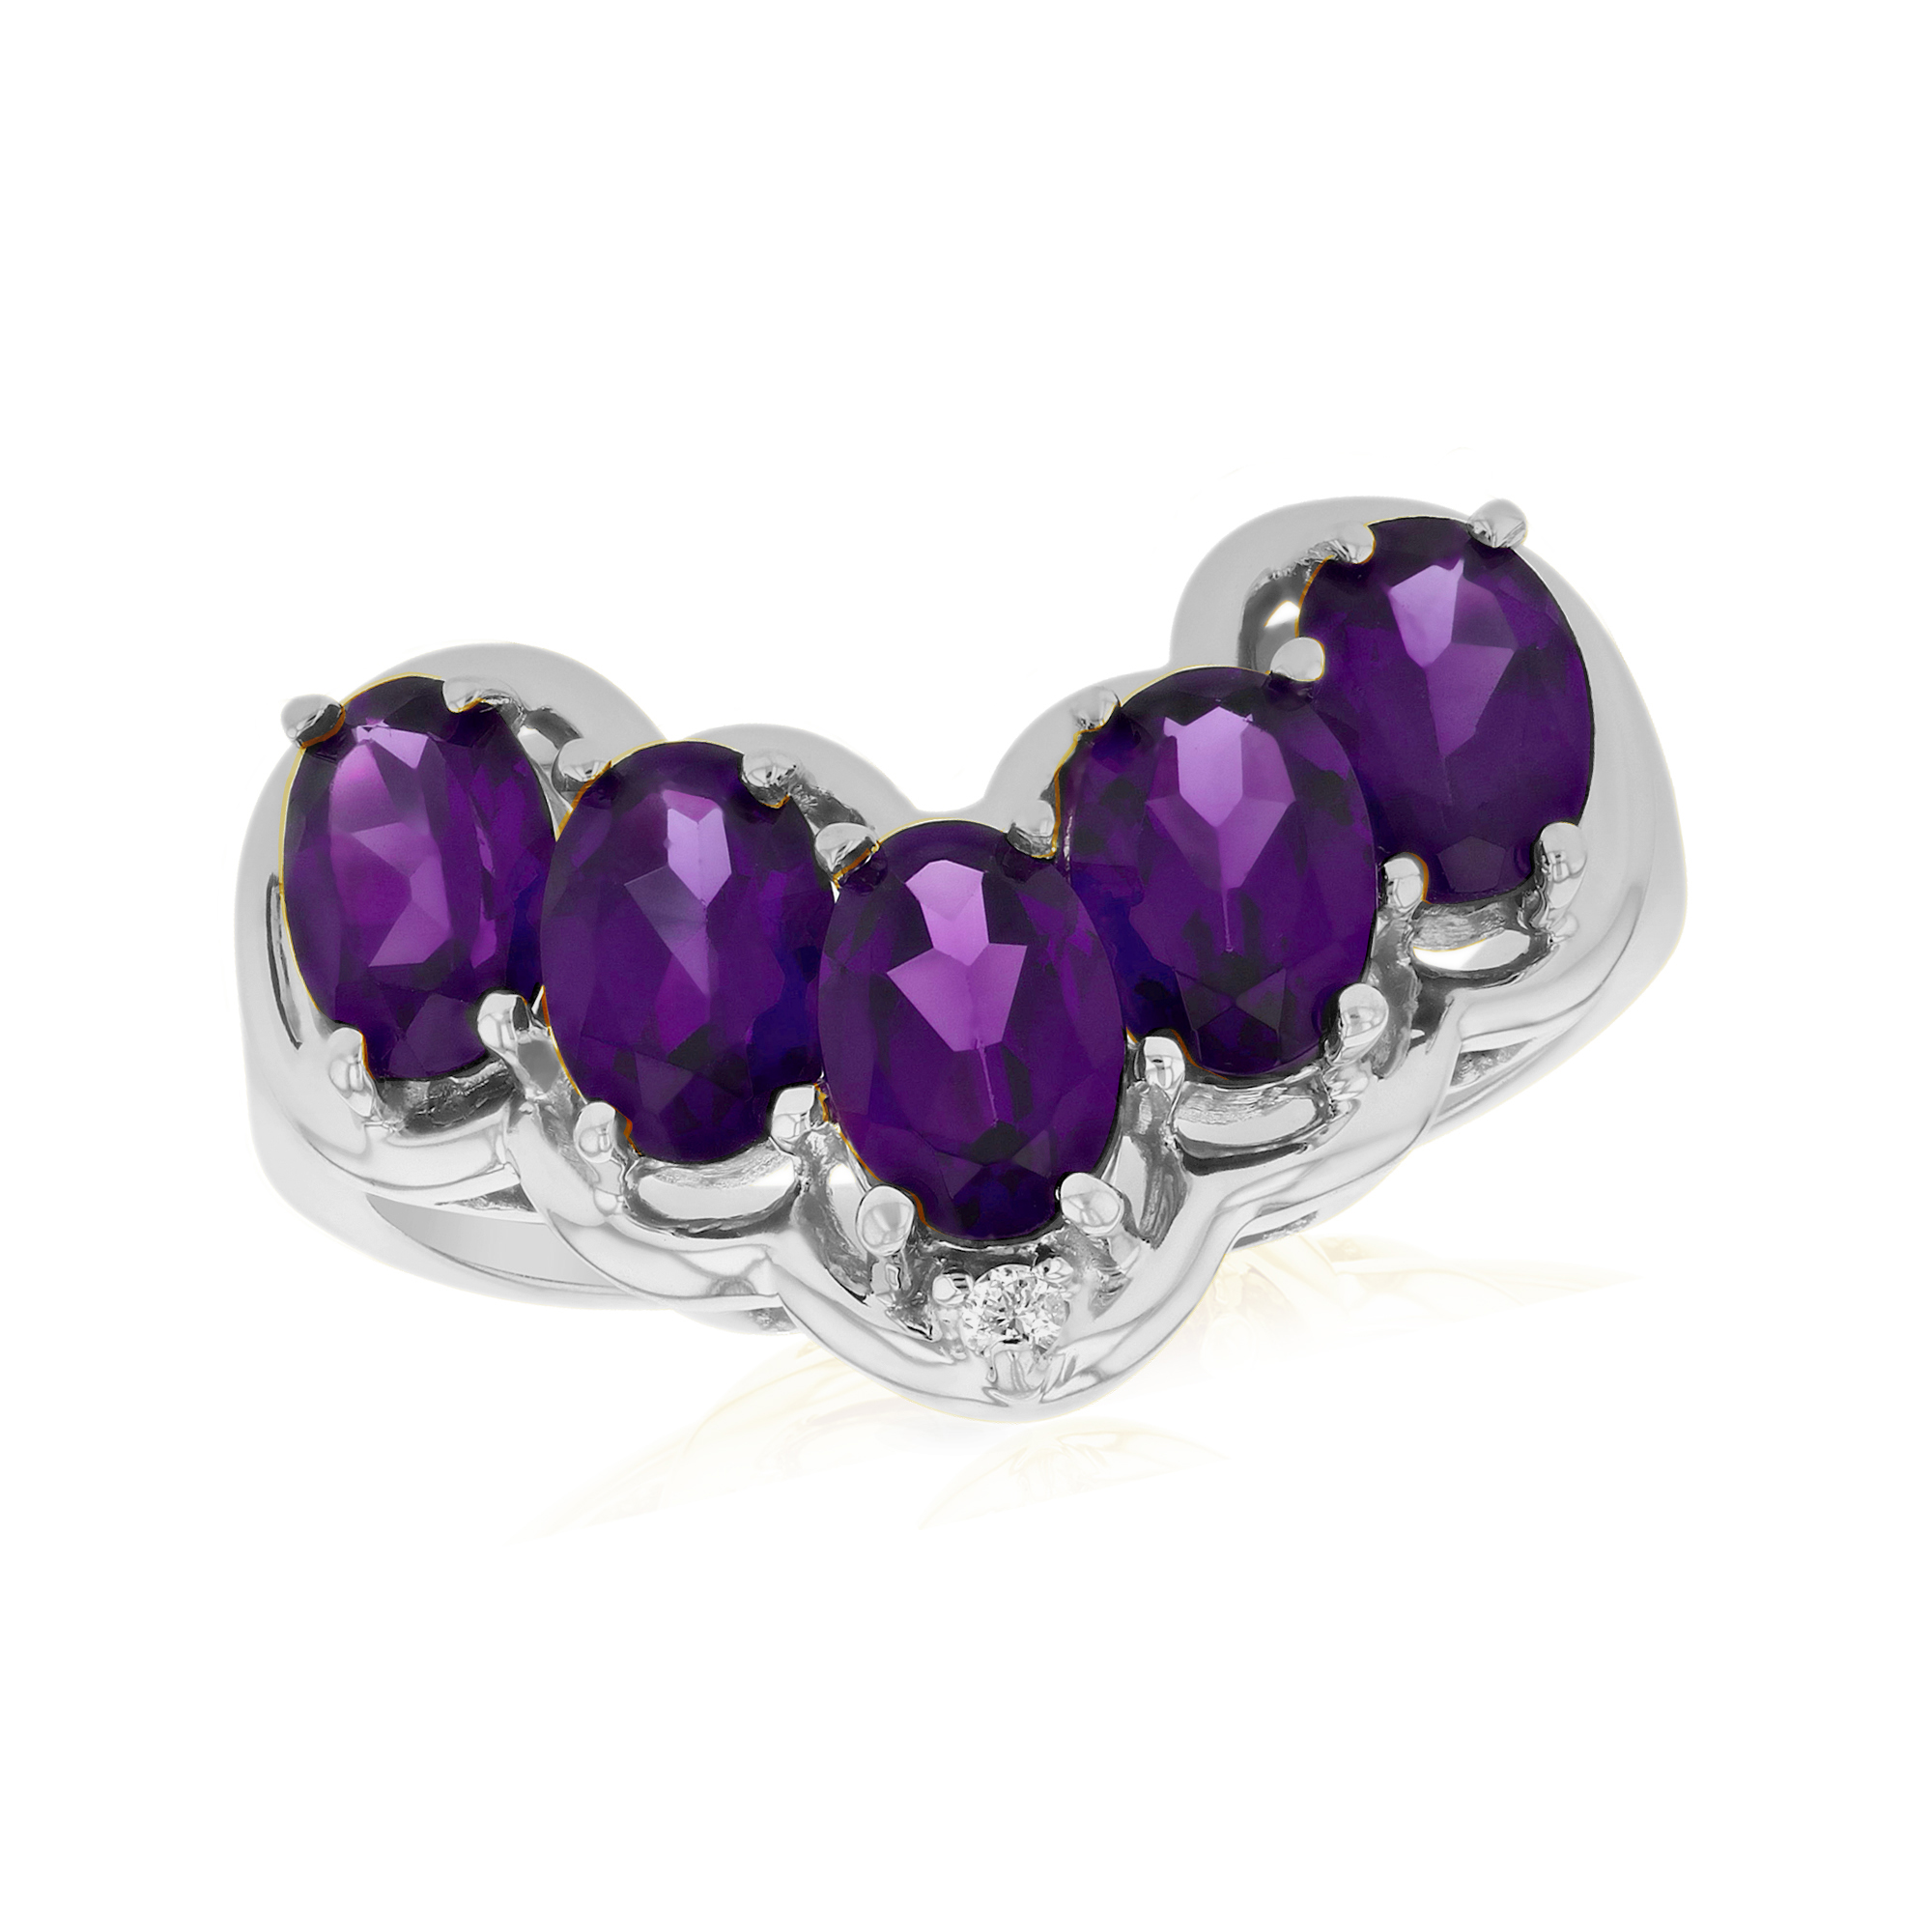 View 0.01ctw Diamond and Amethyst Fashion ring in 14k White Gold